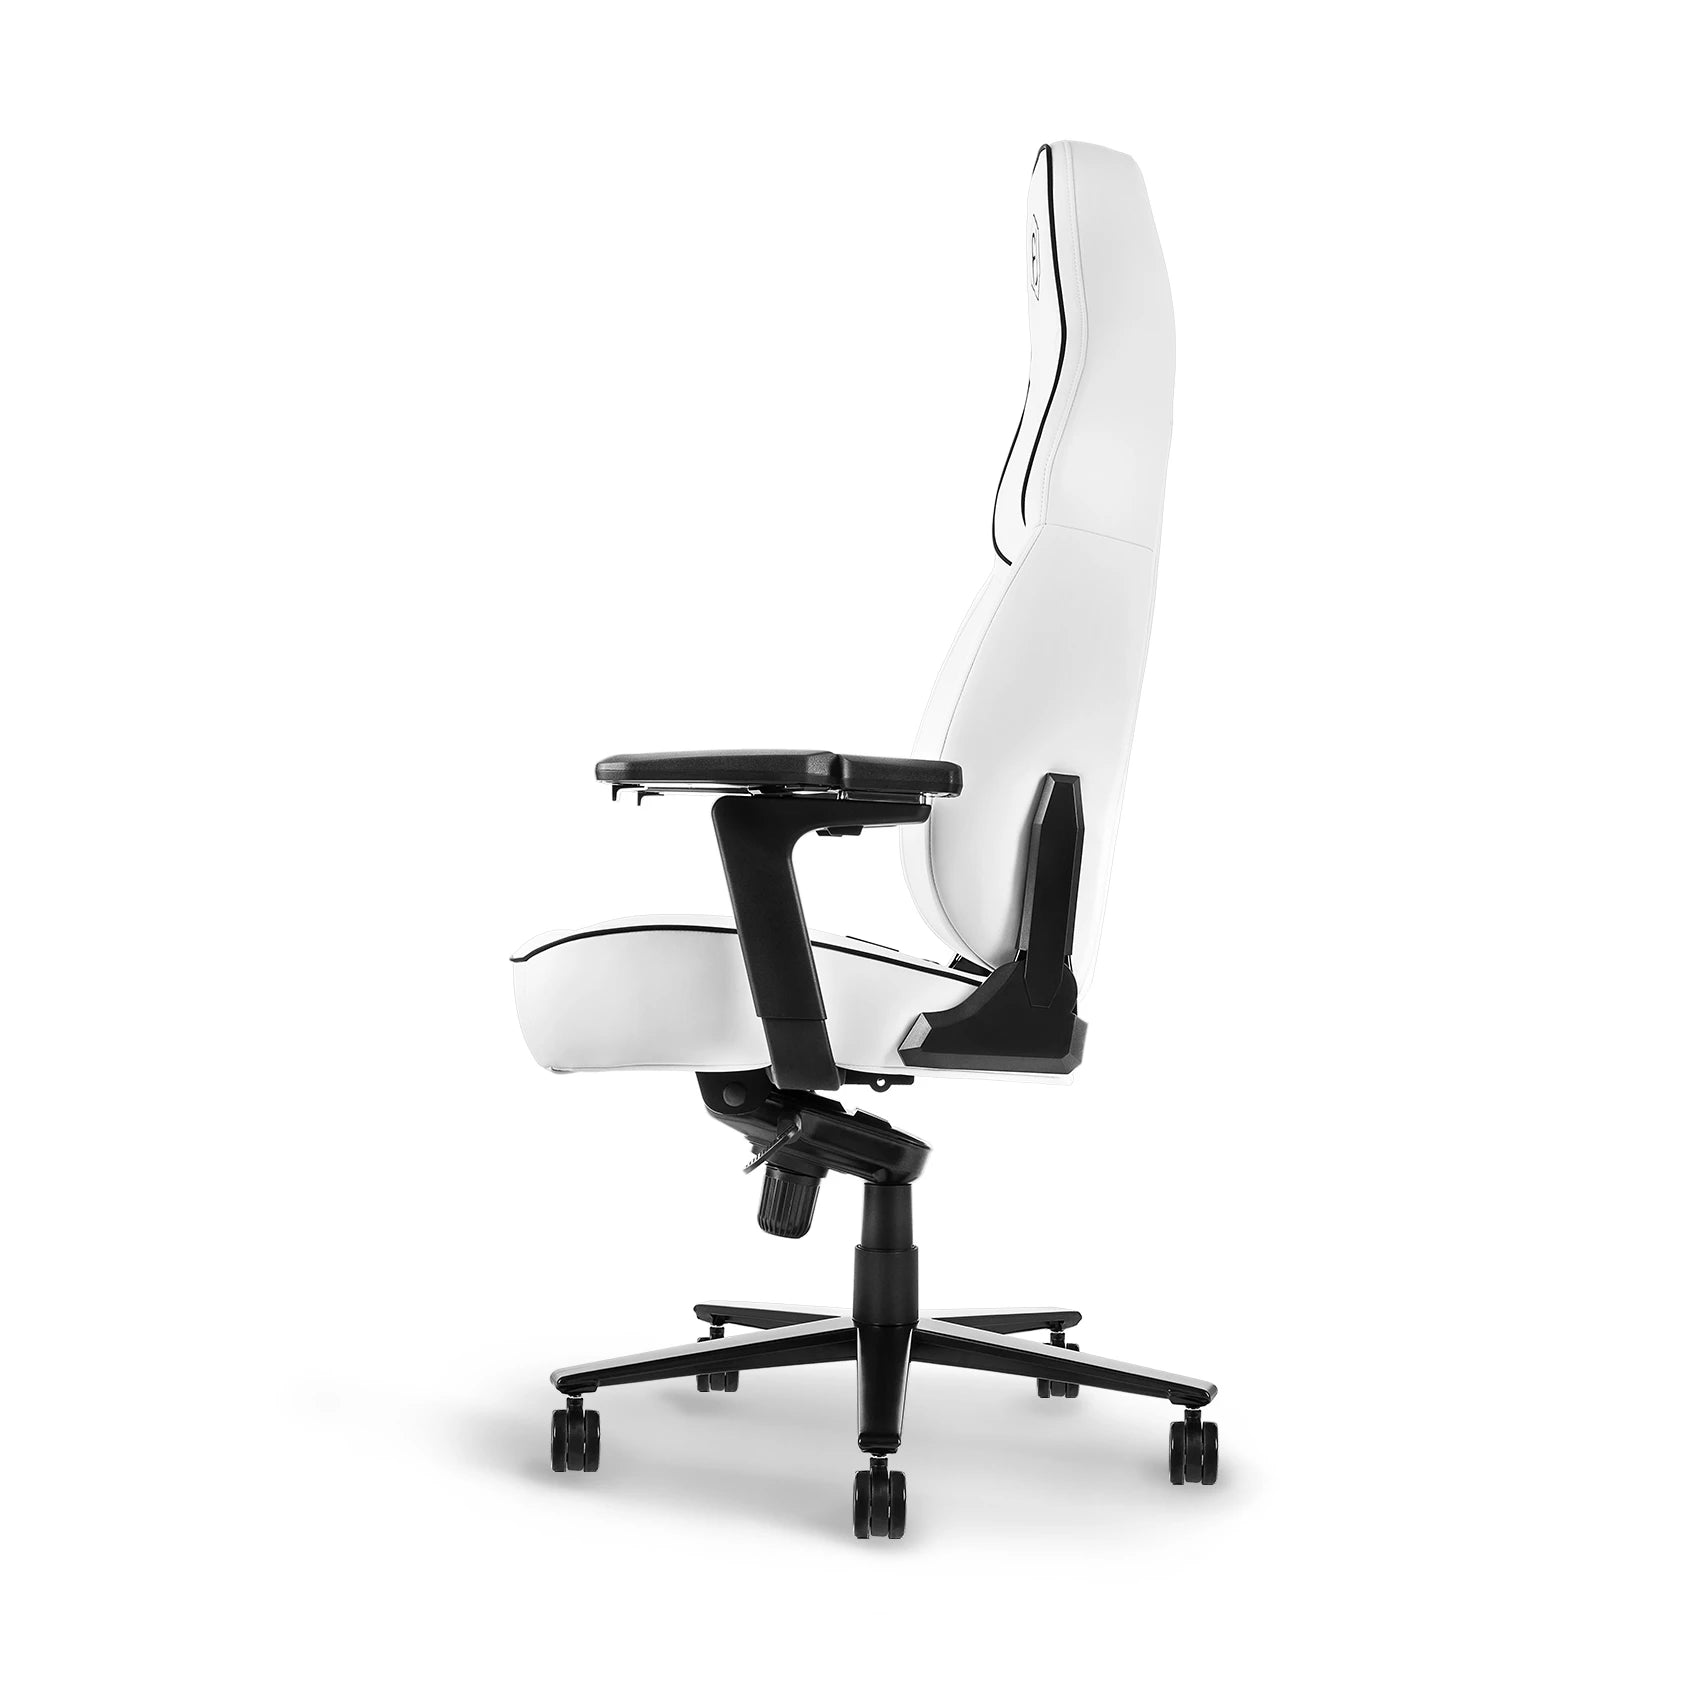 Profile view of a white ergonomic gaming chair with contour lines and a sleek black frame.